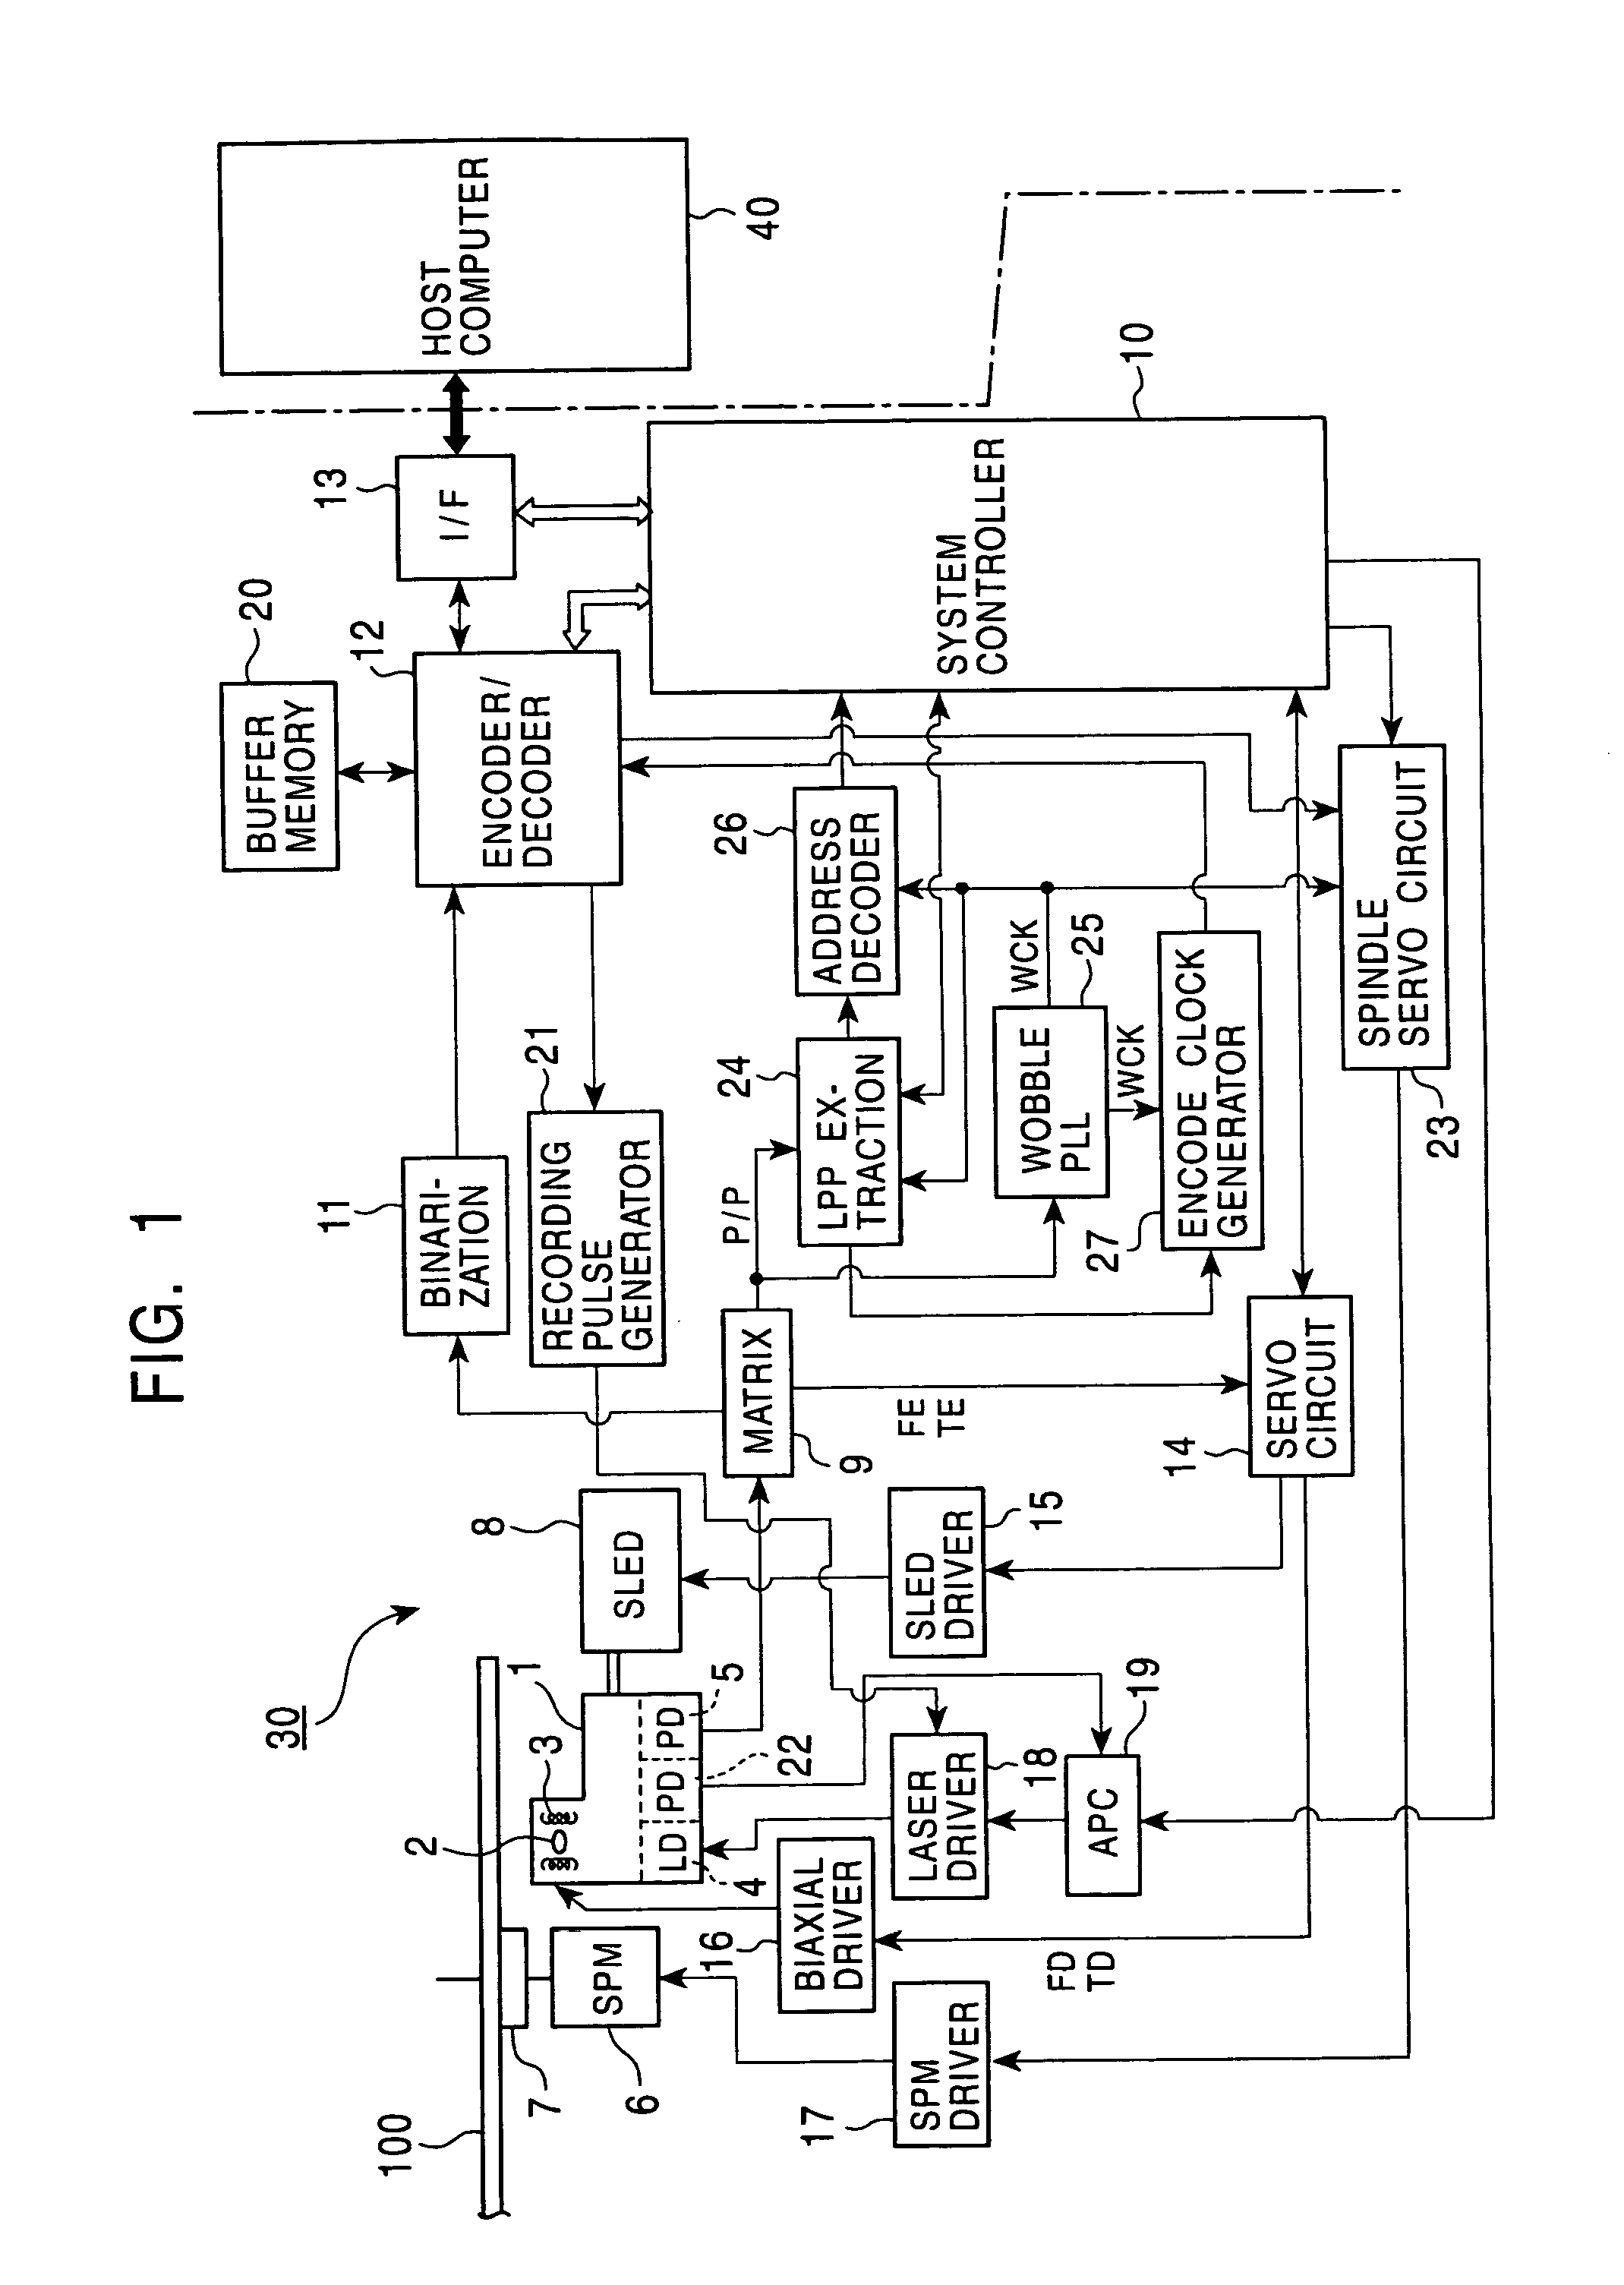 Disk drive and detection method using pre-pit detection and push-pull signal generation